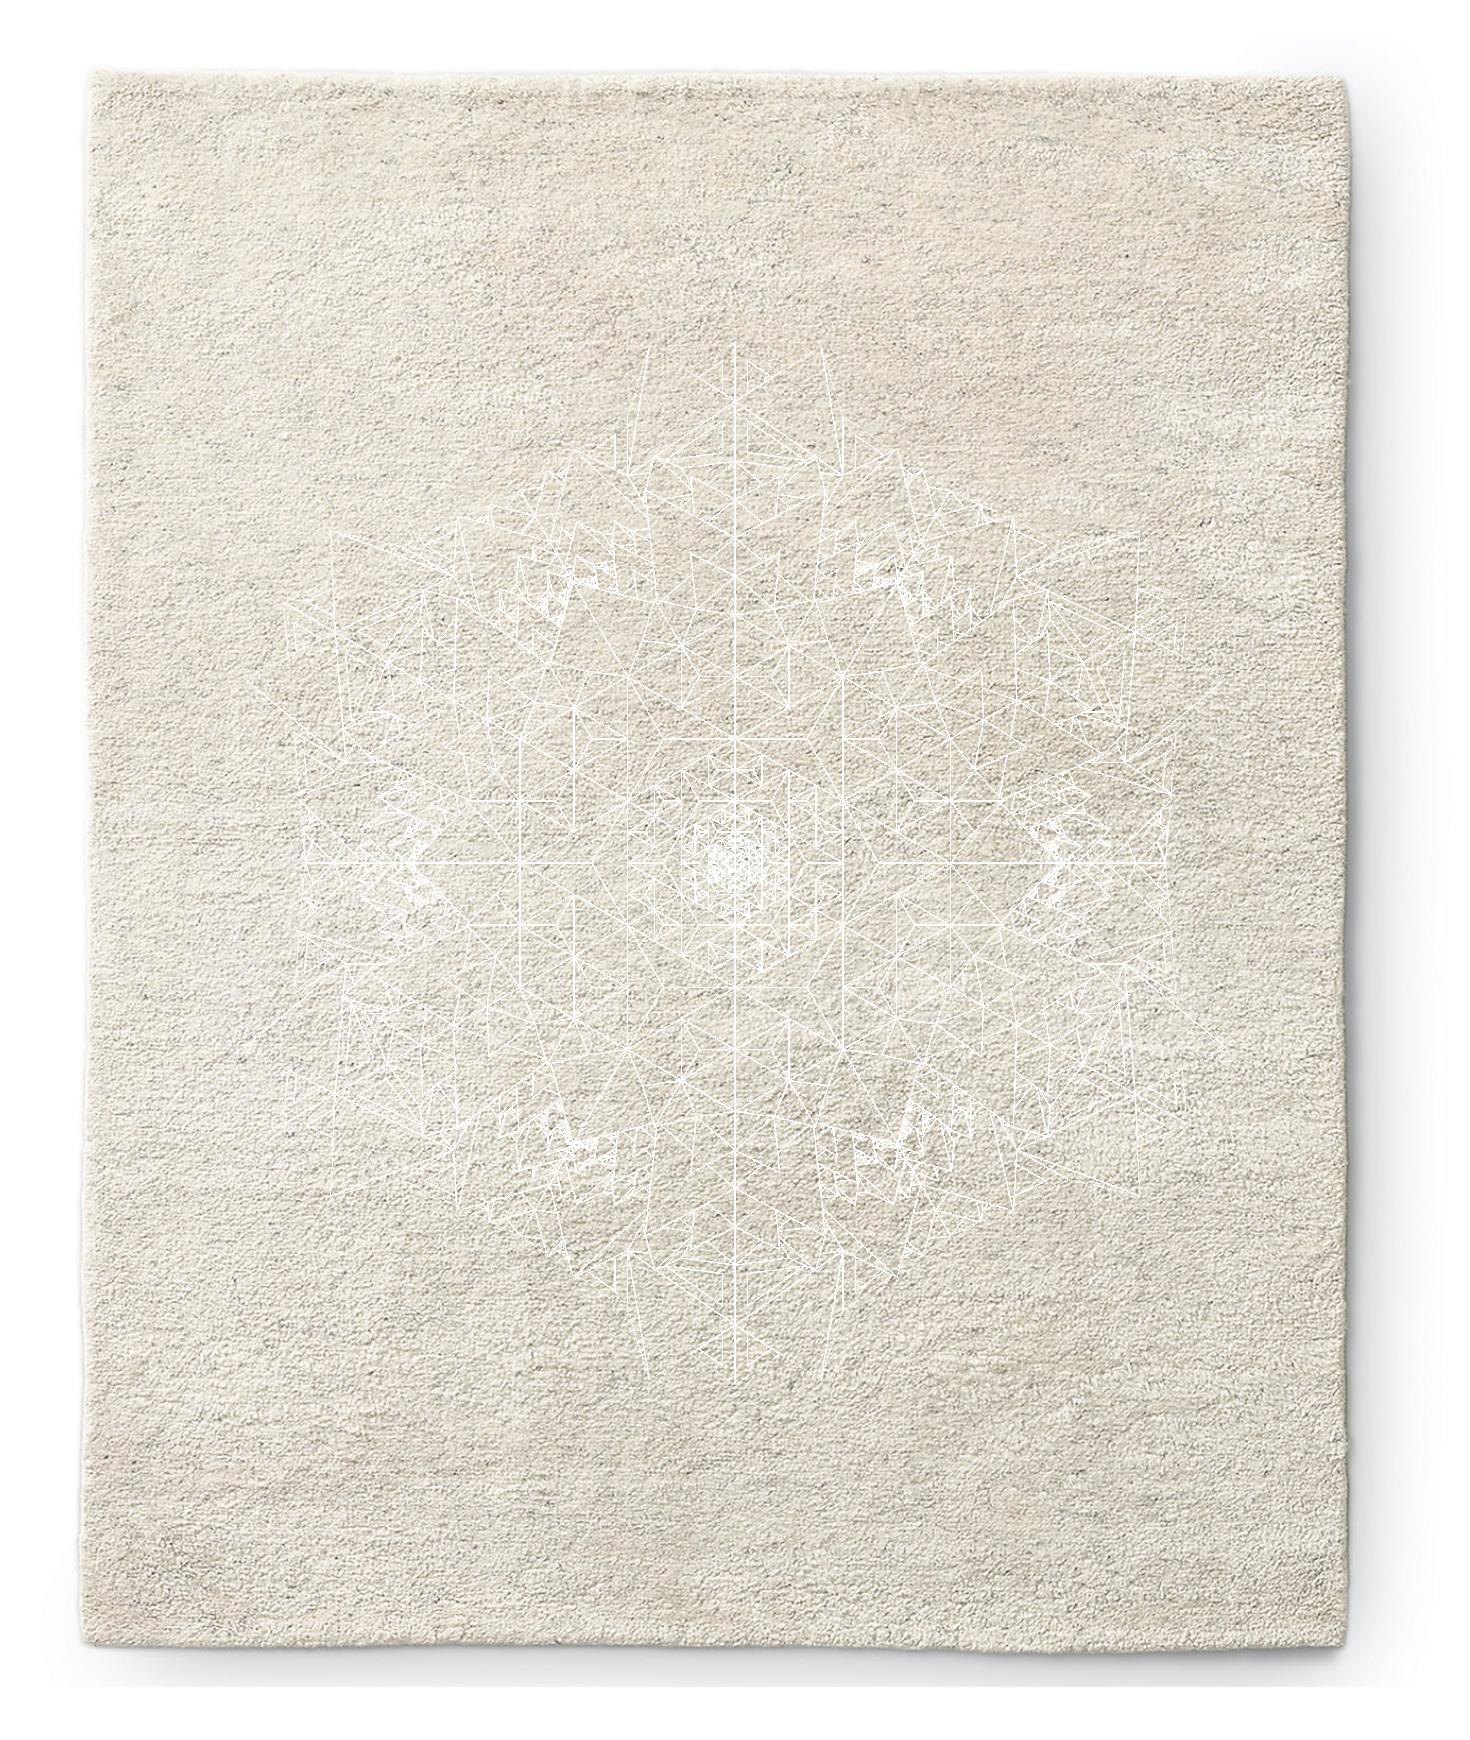 Inspired by principles of sacred geometry, this mind altering handmade spun wool rug is a sophisticated piece for any home. The intricate interlocking geometries evoke a deep sense of timeless elegance. The bold geometric graphic instantly adds